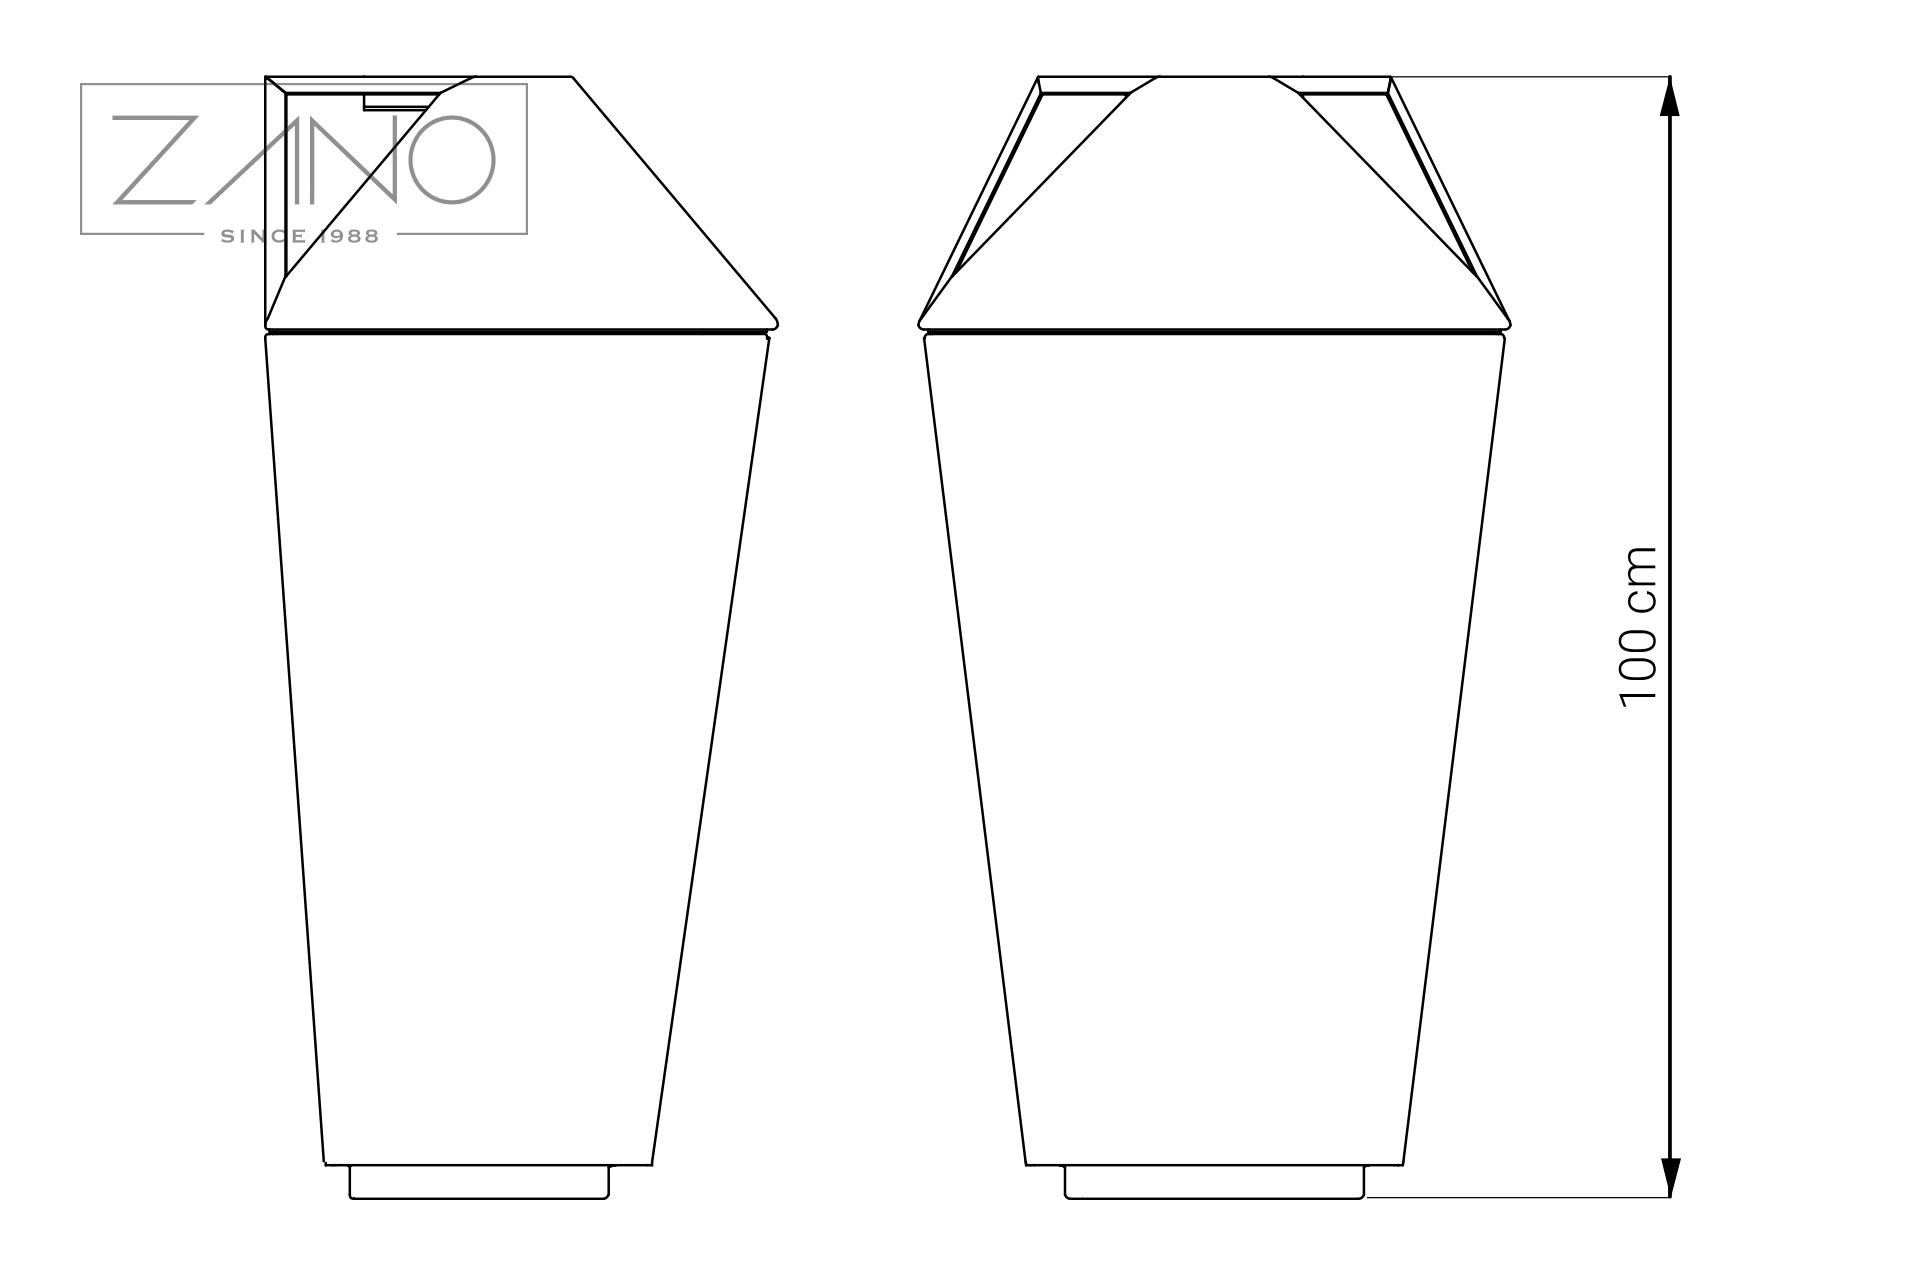 Litter bin with ashtay IVO dimensions